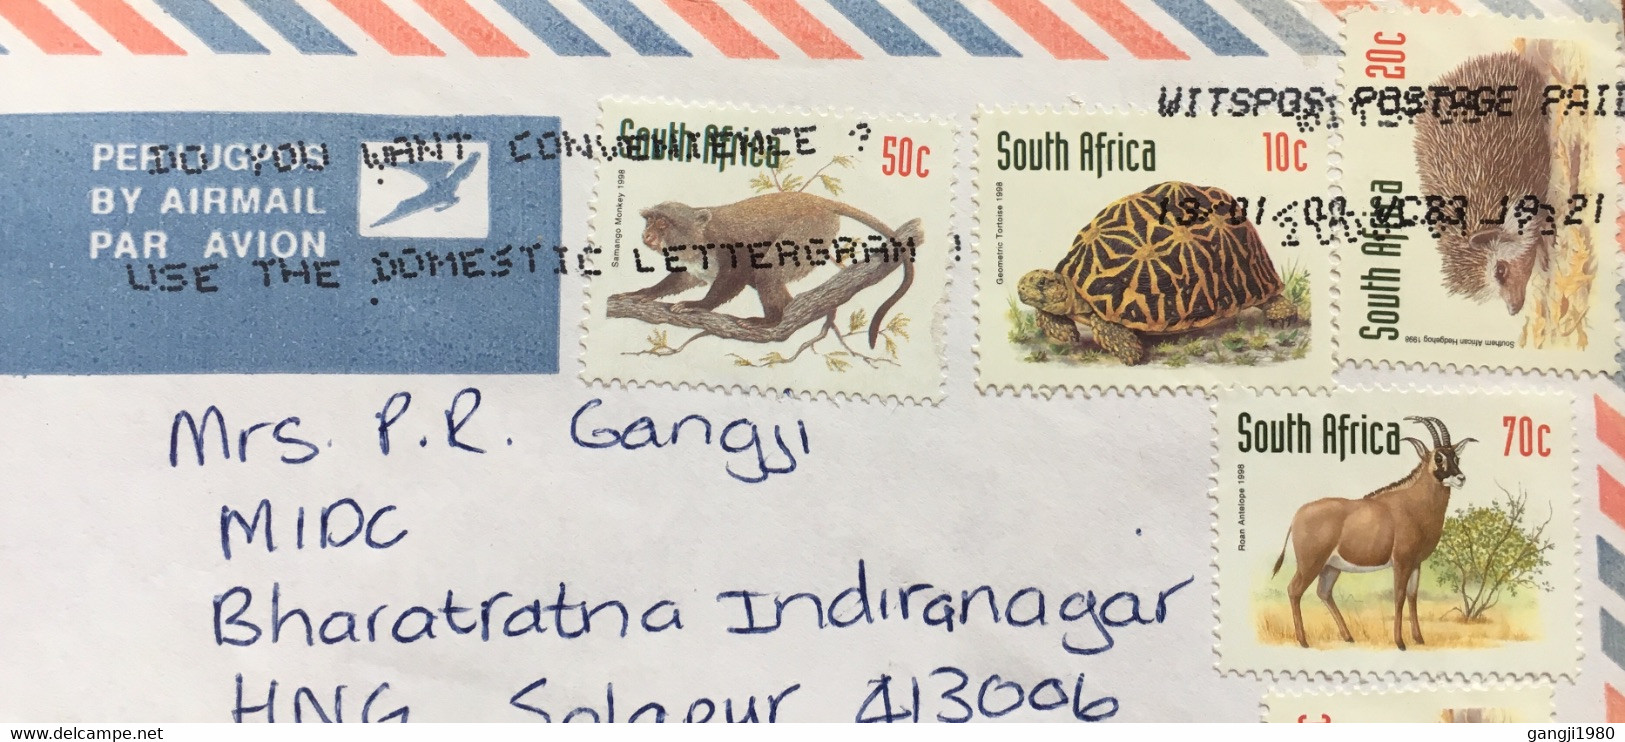 SOUTH AFRICA 2000, 8 STAMPS ALL ANIMALS !! MONKEY ,TORTISE ,DEER SLOGAN ,DO YOU WANT CONVIENCE ,U.S.A. THE DOMESTIC LETT - Covers & Documents